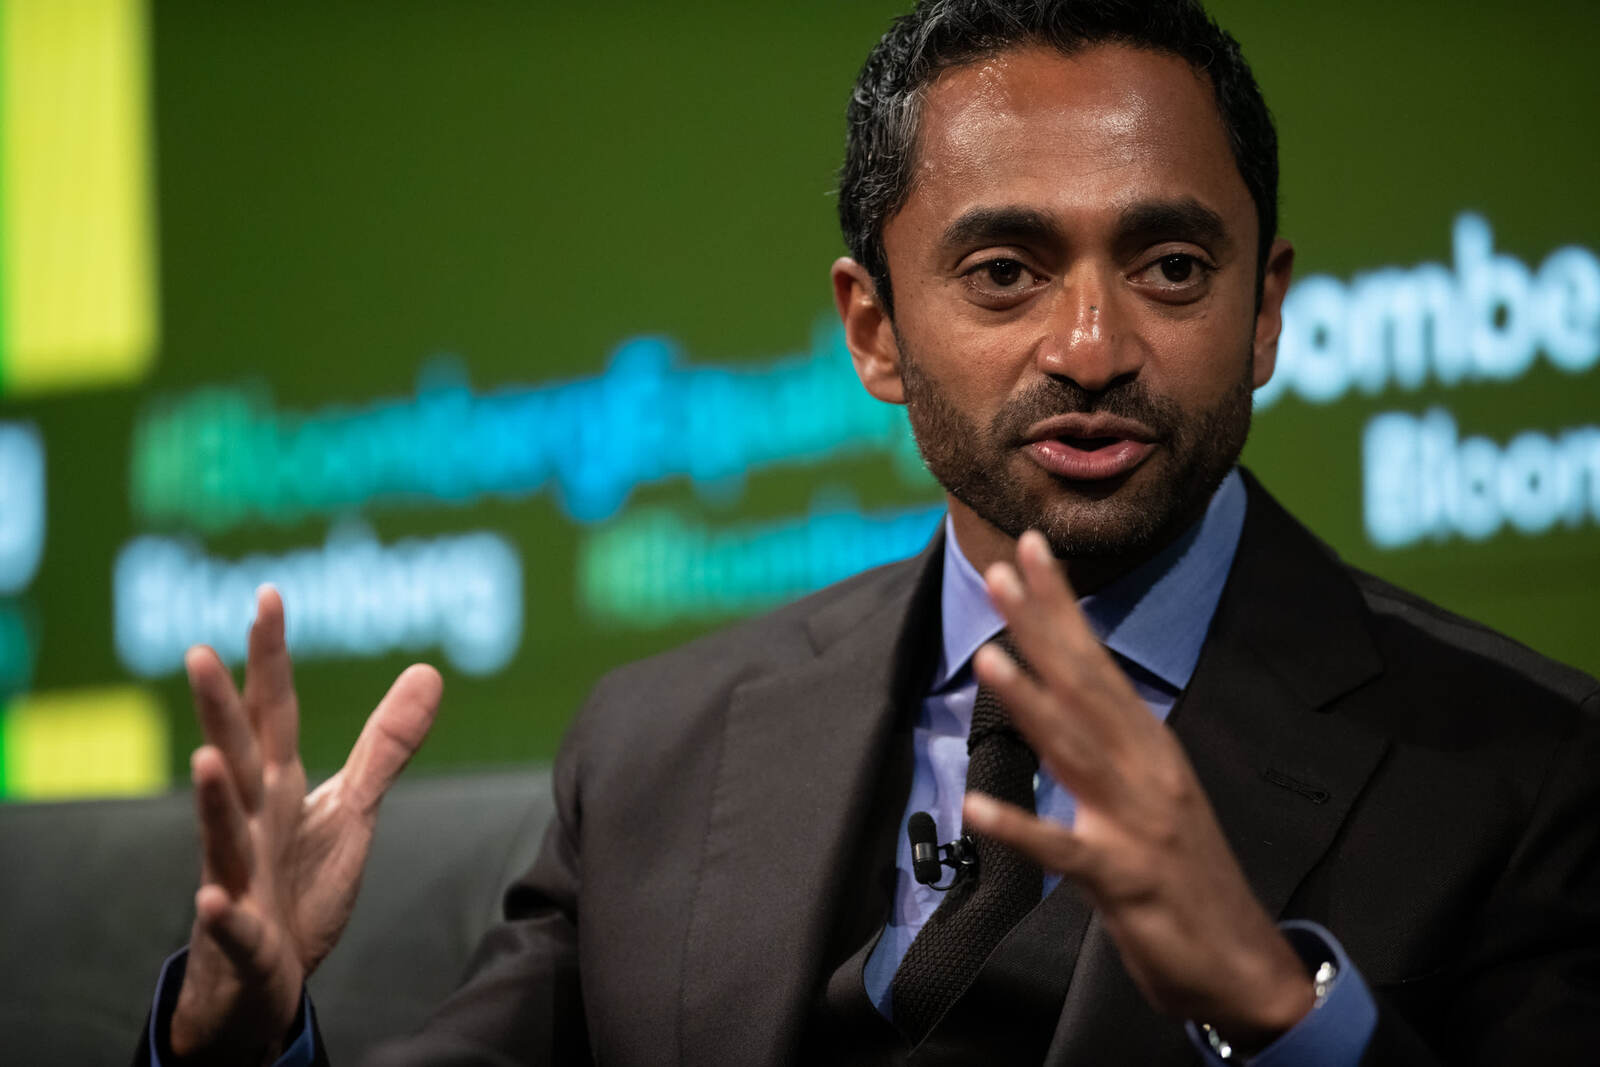 Billionaire investor Chamath Palihapitiya says 'nobody cares' about Uyghur genocide in China